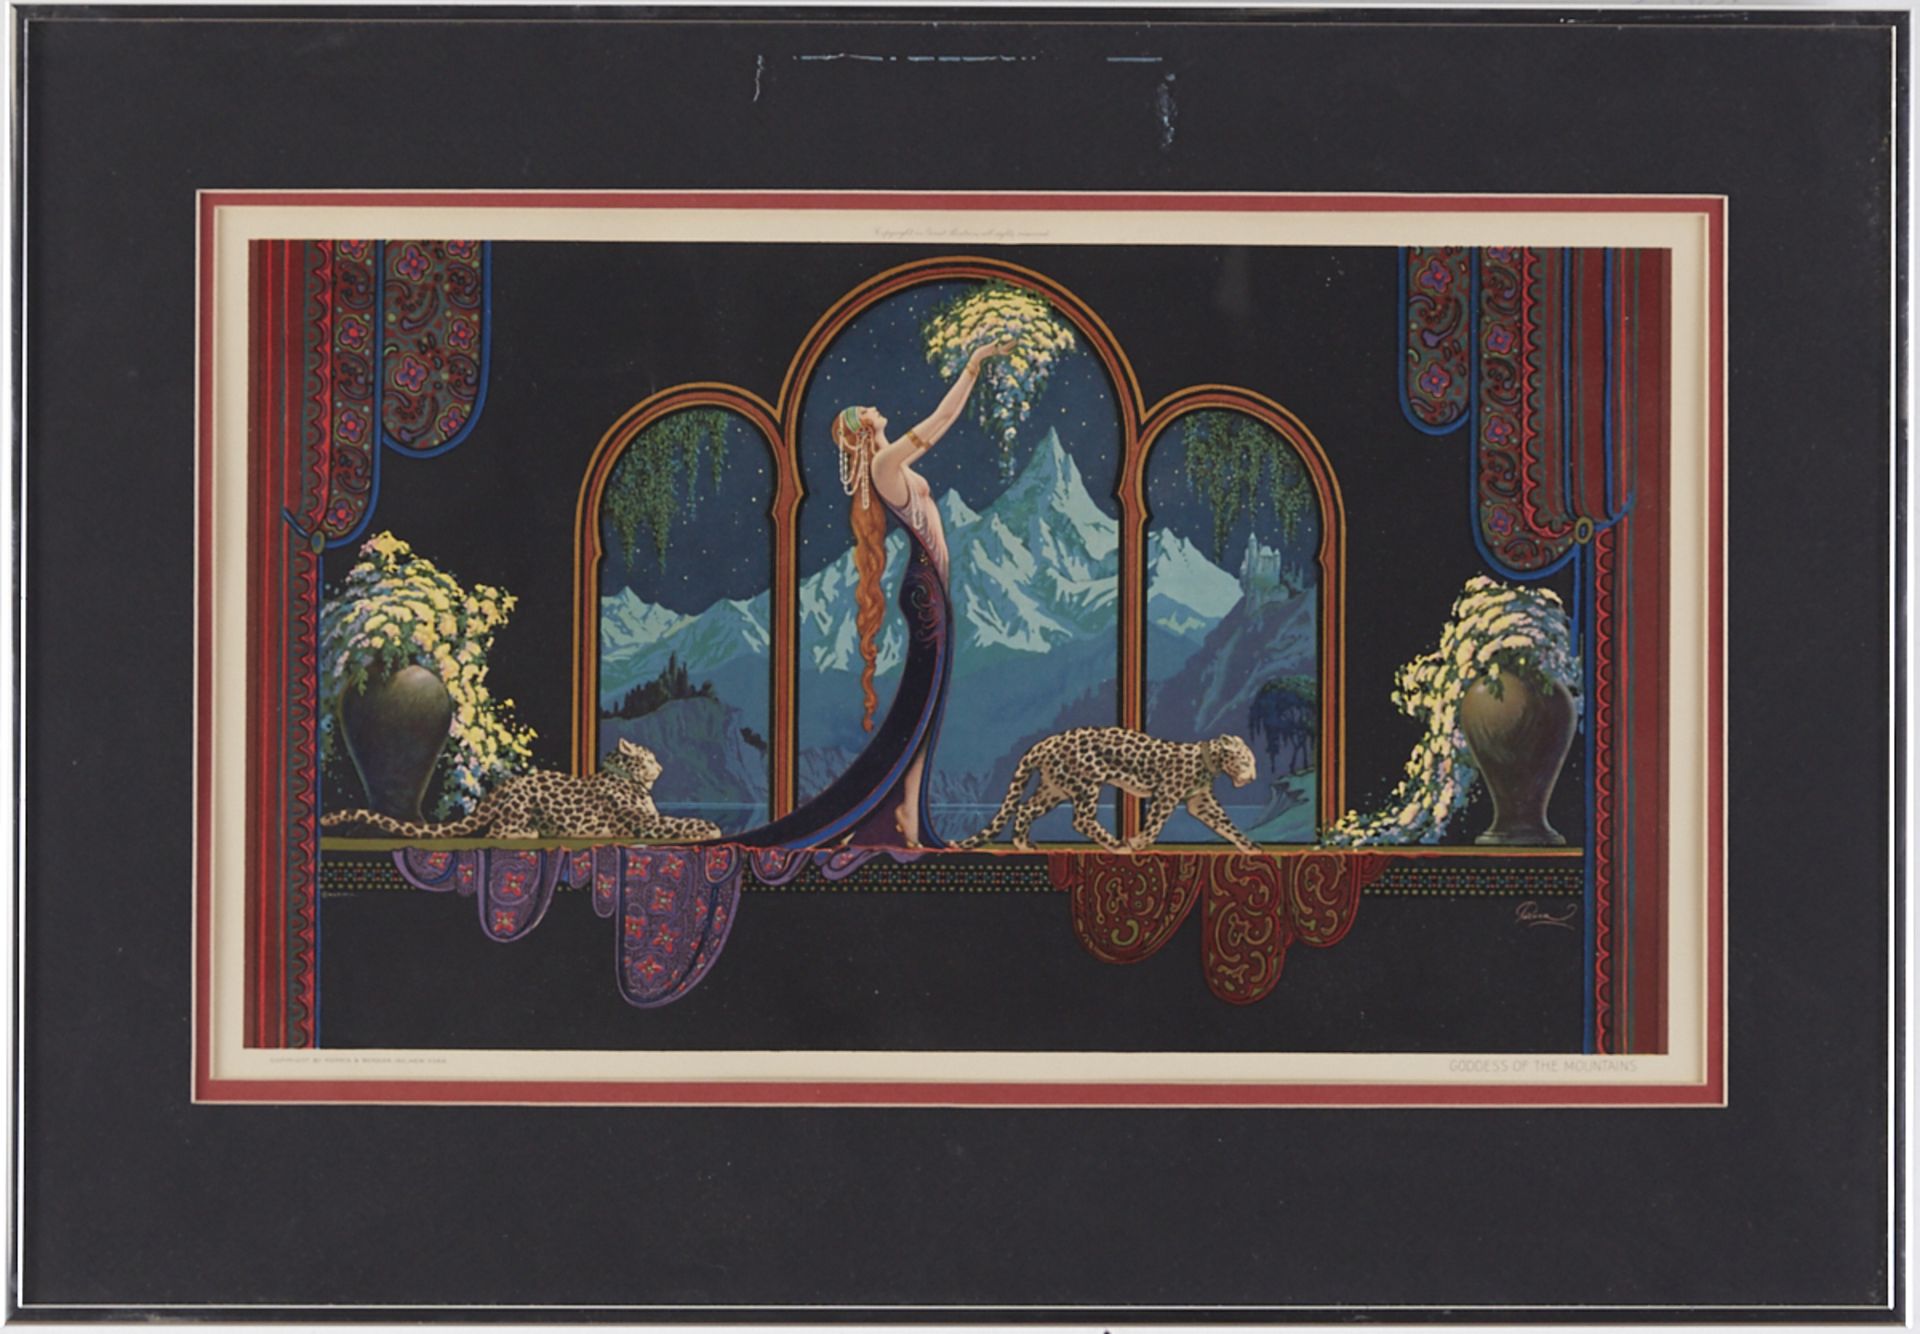 Frederick Packer Art Deco Print "Goddess of the Mountains" - Image 2 of 6